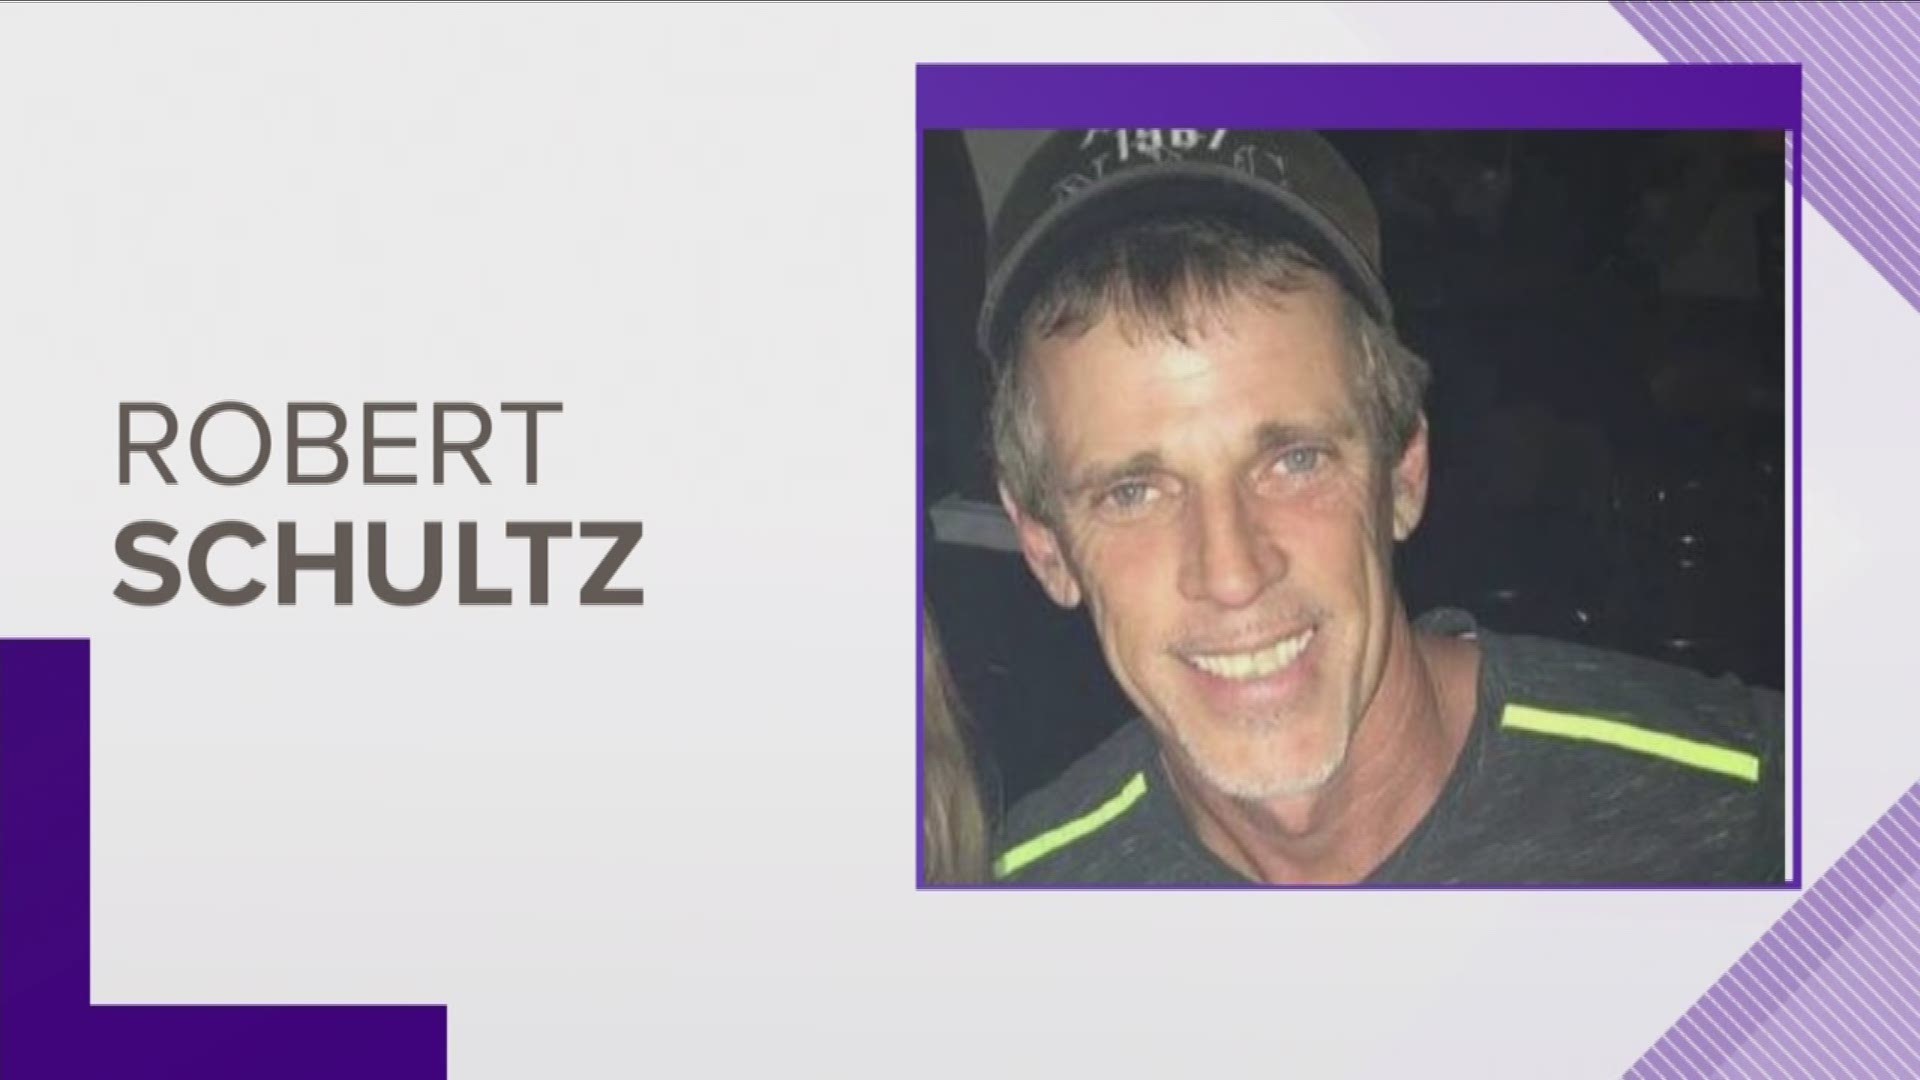 The Maryville Police Department says it's searching for Robert Schultz. He was last seen on Monday, July 23.